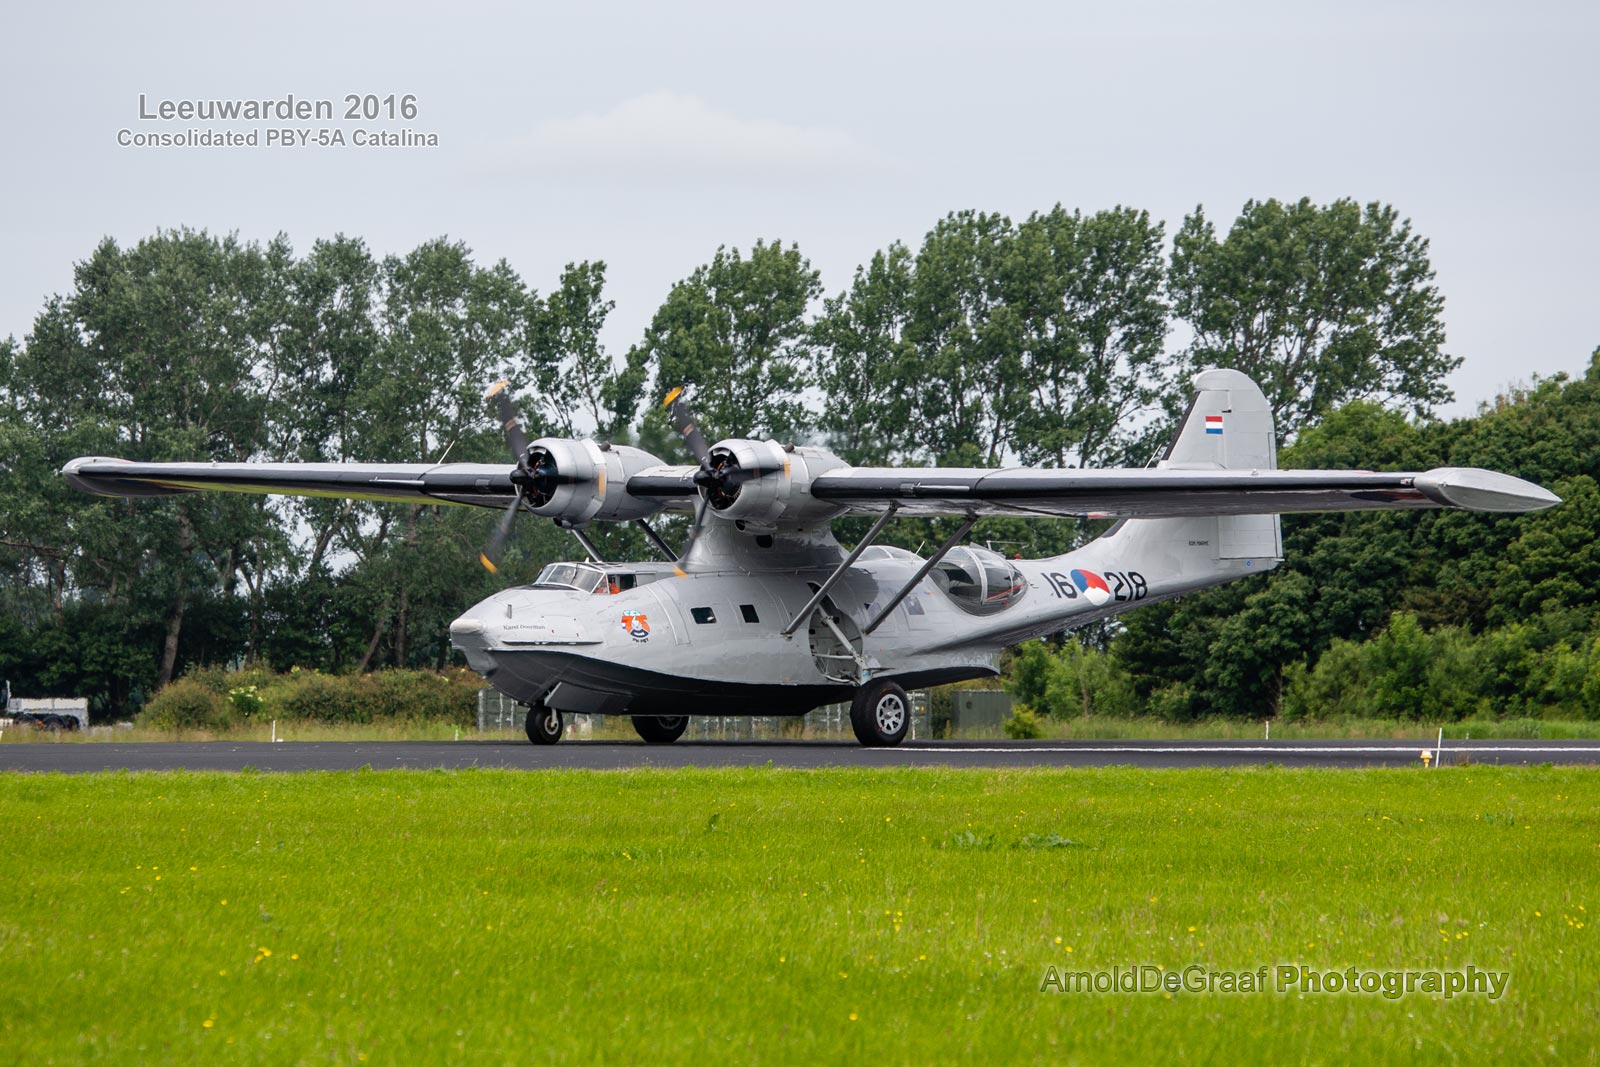 onsolidated PBY-5A Catalina